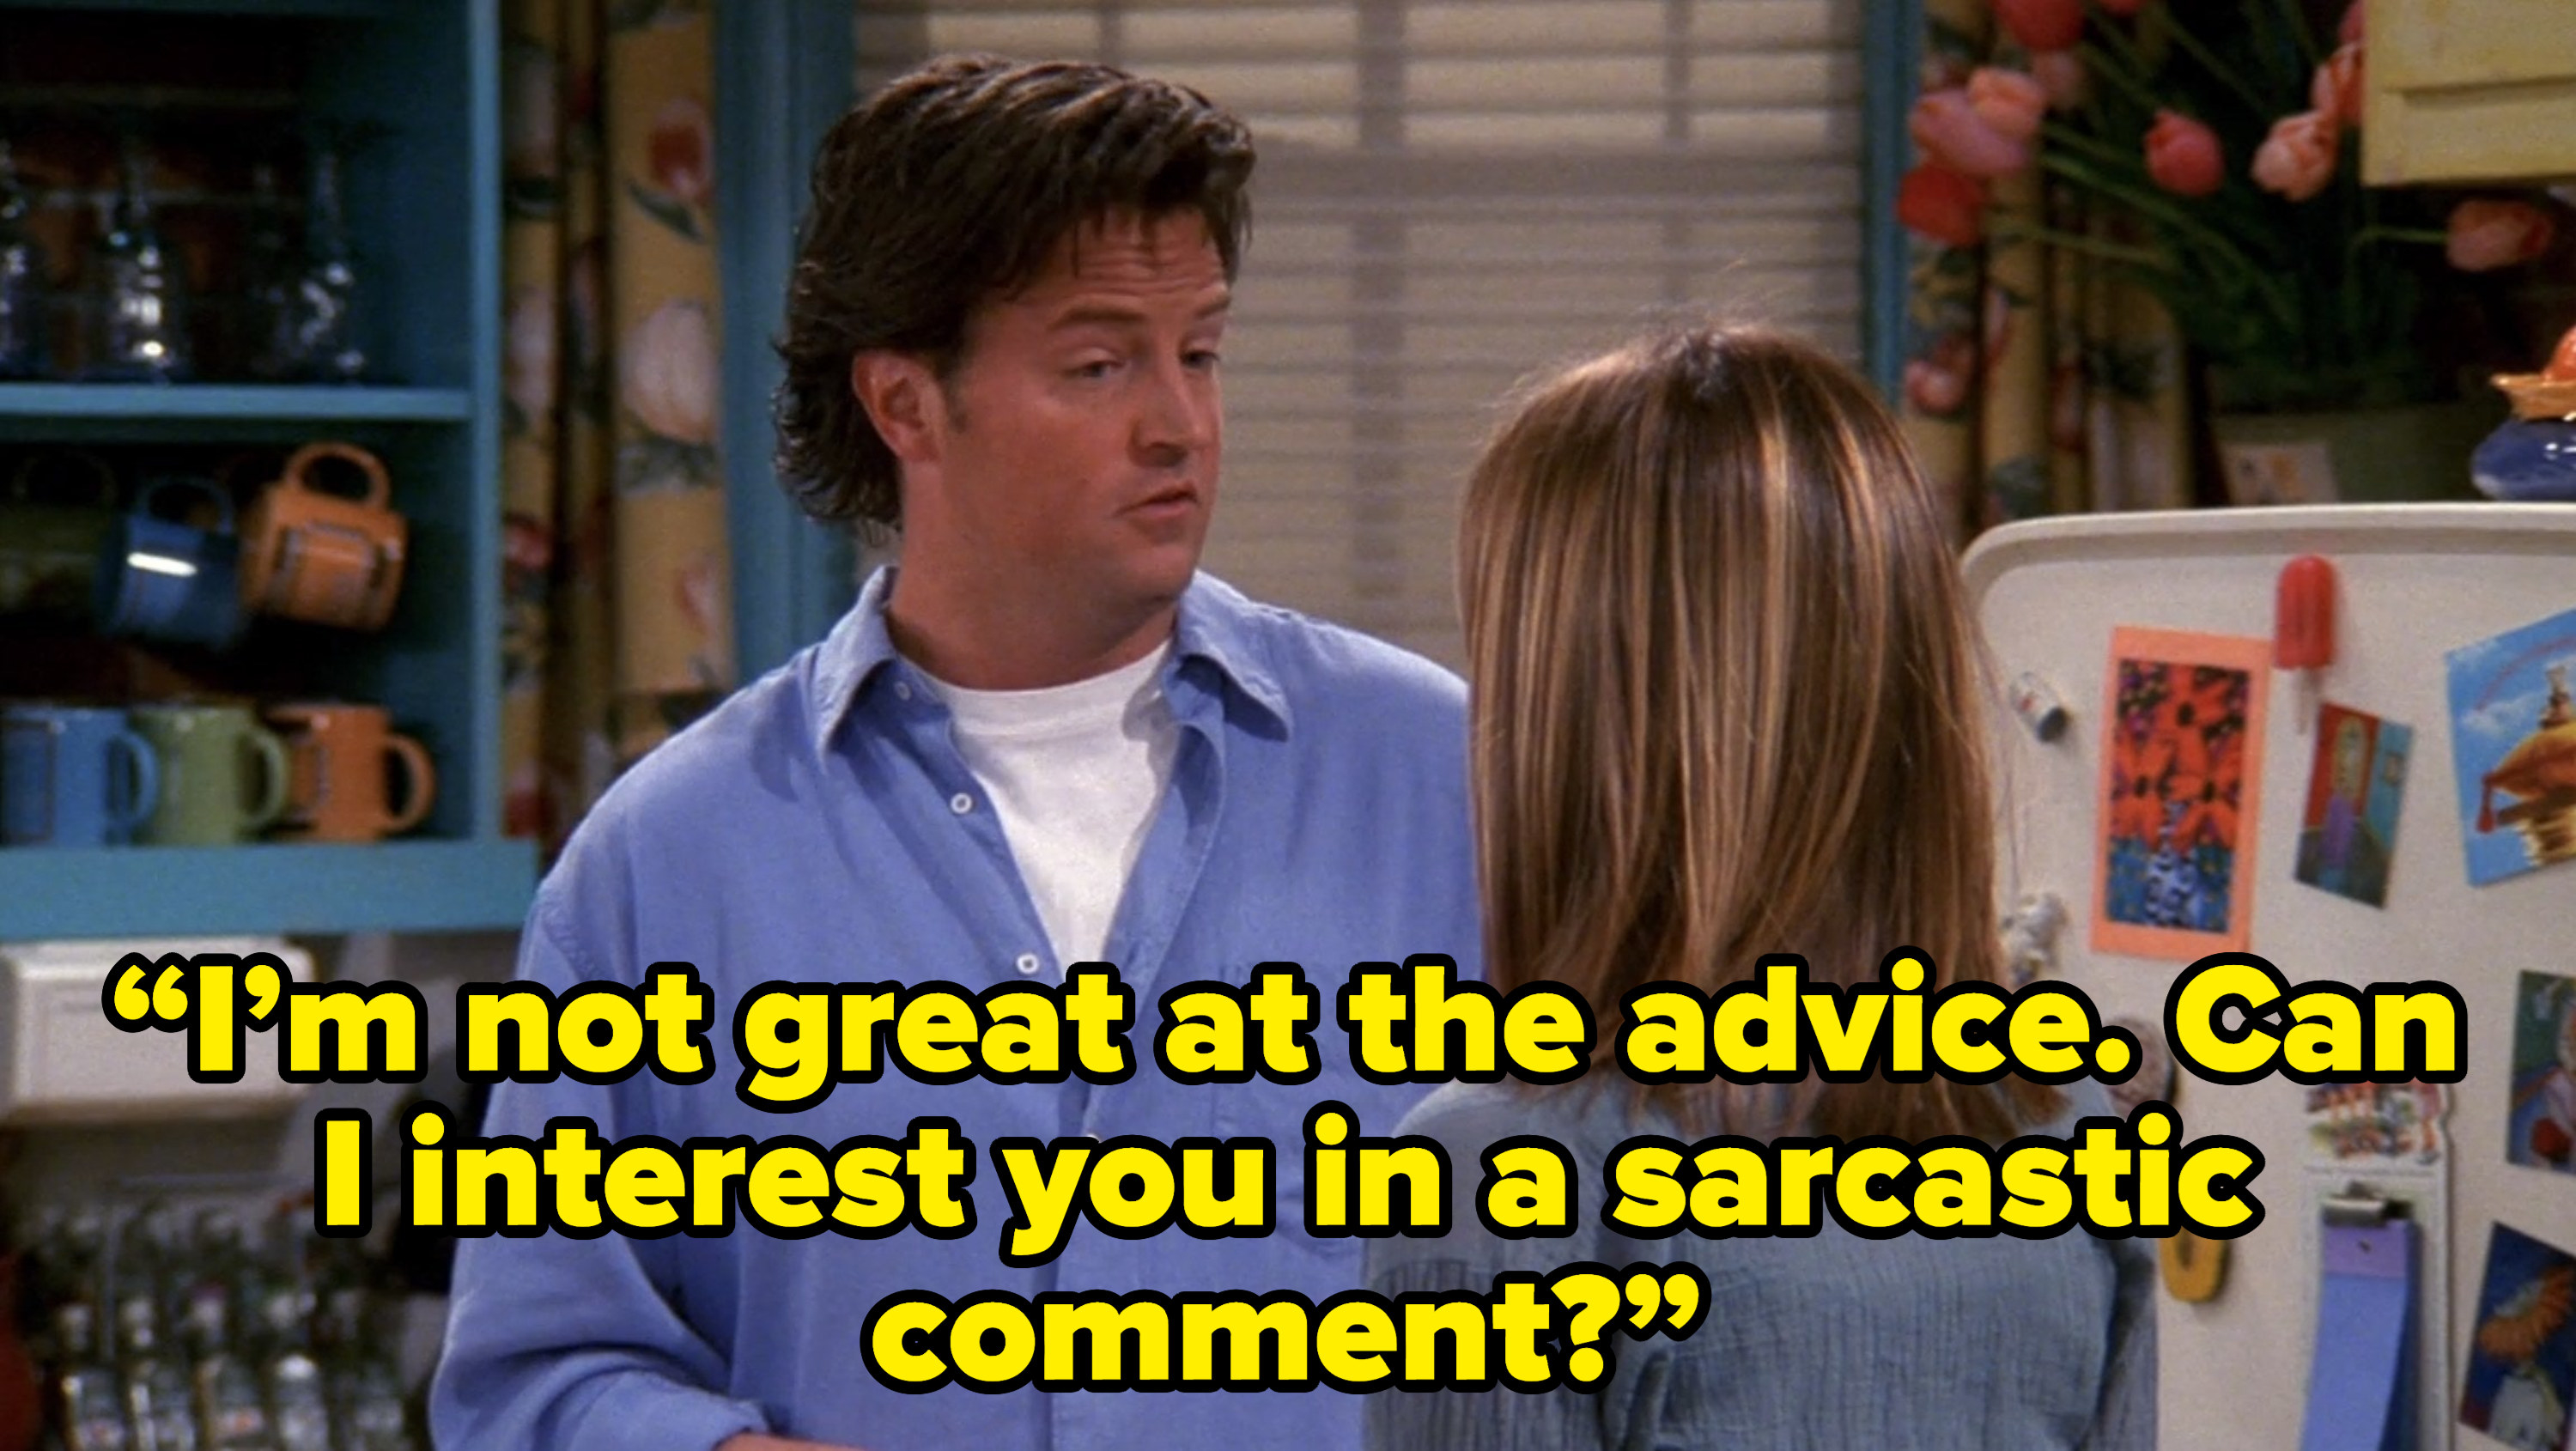 chandler telling rachel “I’m not great at the advice. Can I interest you in a sarcastic comment?” on friends